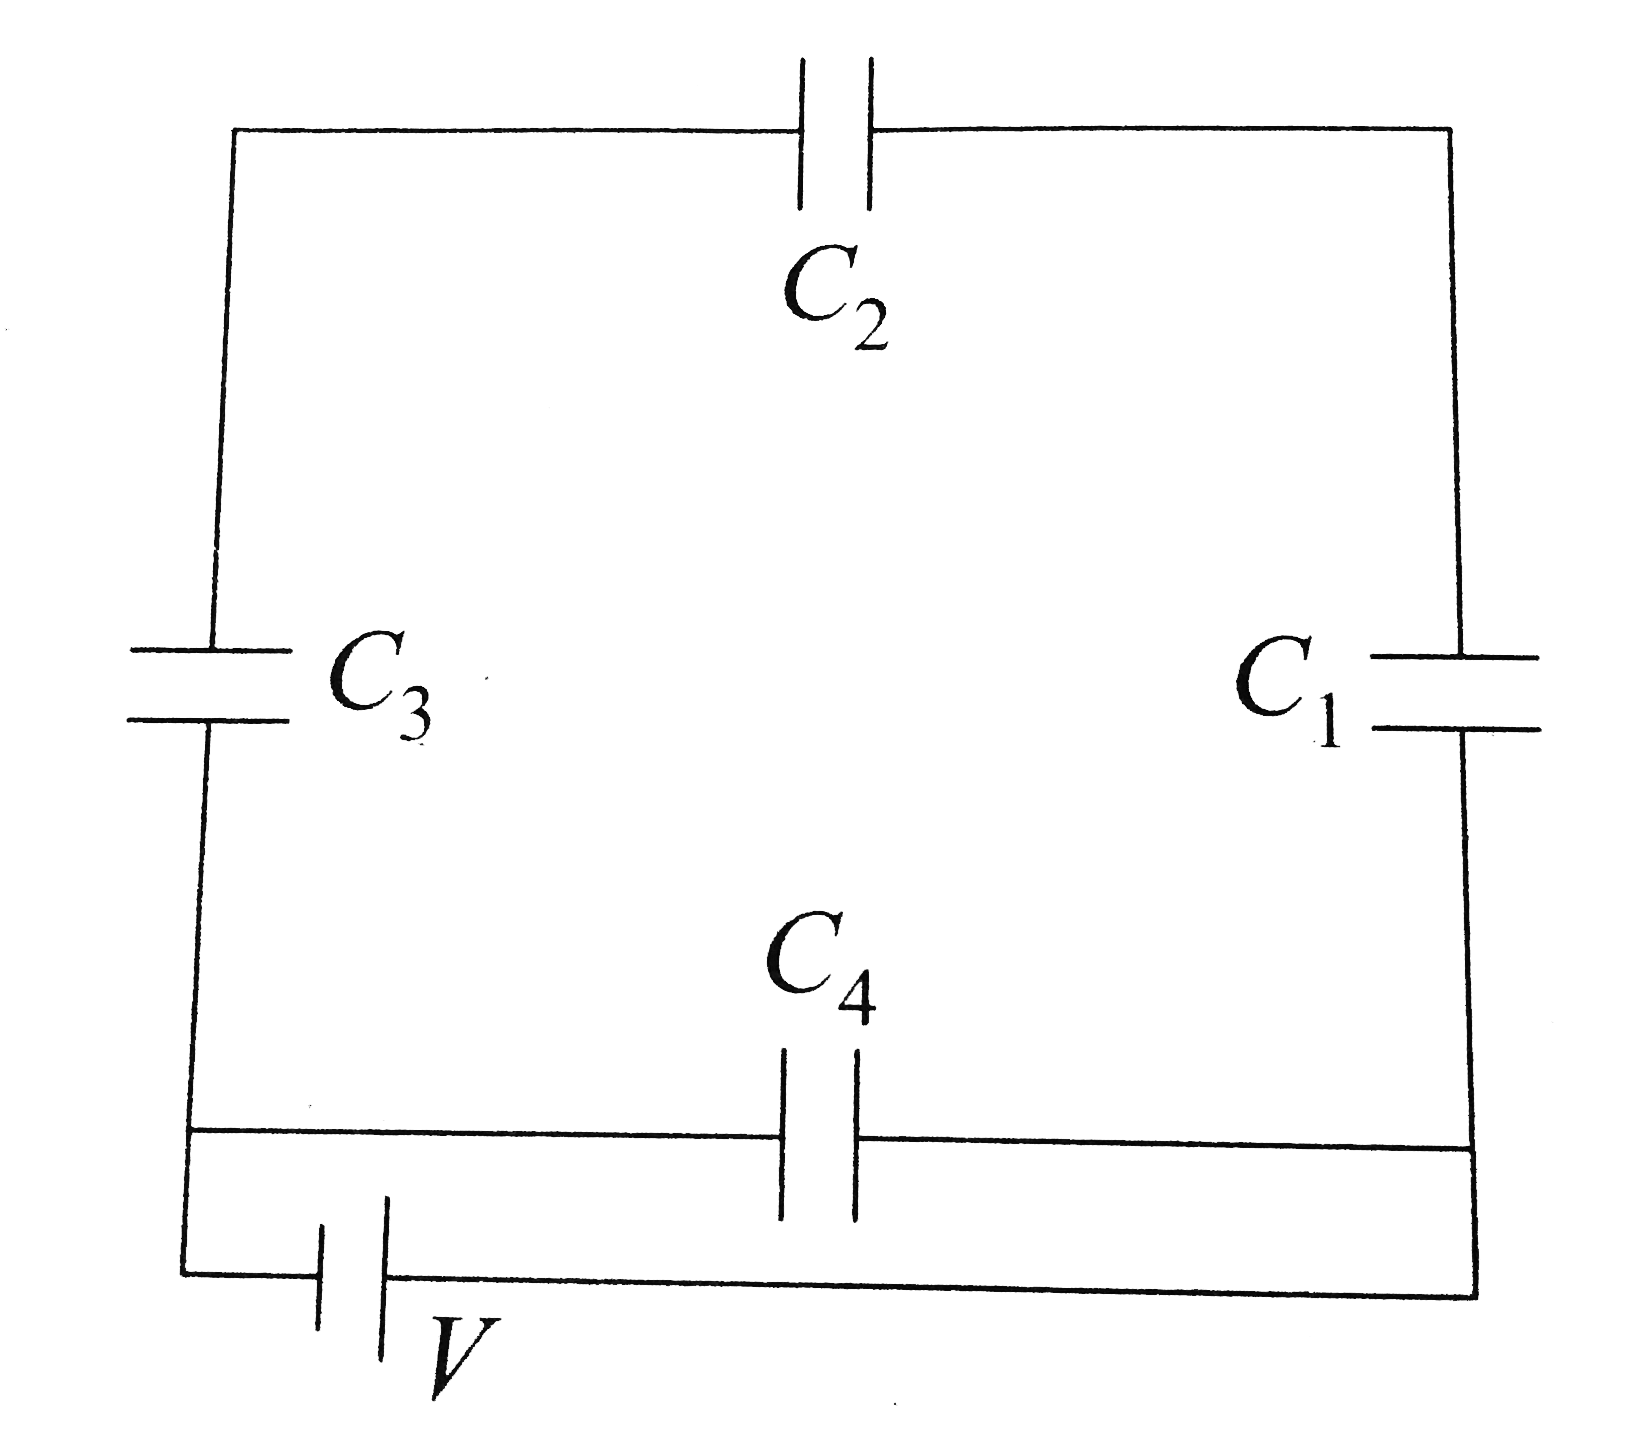 A network of four capacitors of capacity equal to C(1) = C, C(2) = 2C, C(3) = 3C and C(4) = 4C are connected to a battery as shown in the figure. The ratio o fthe charges on C(2) an C(4) is